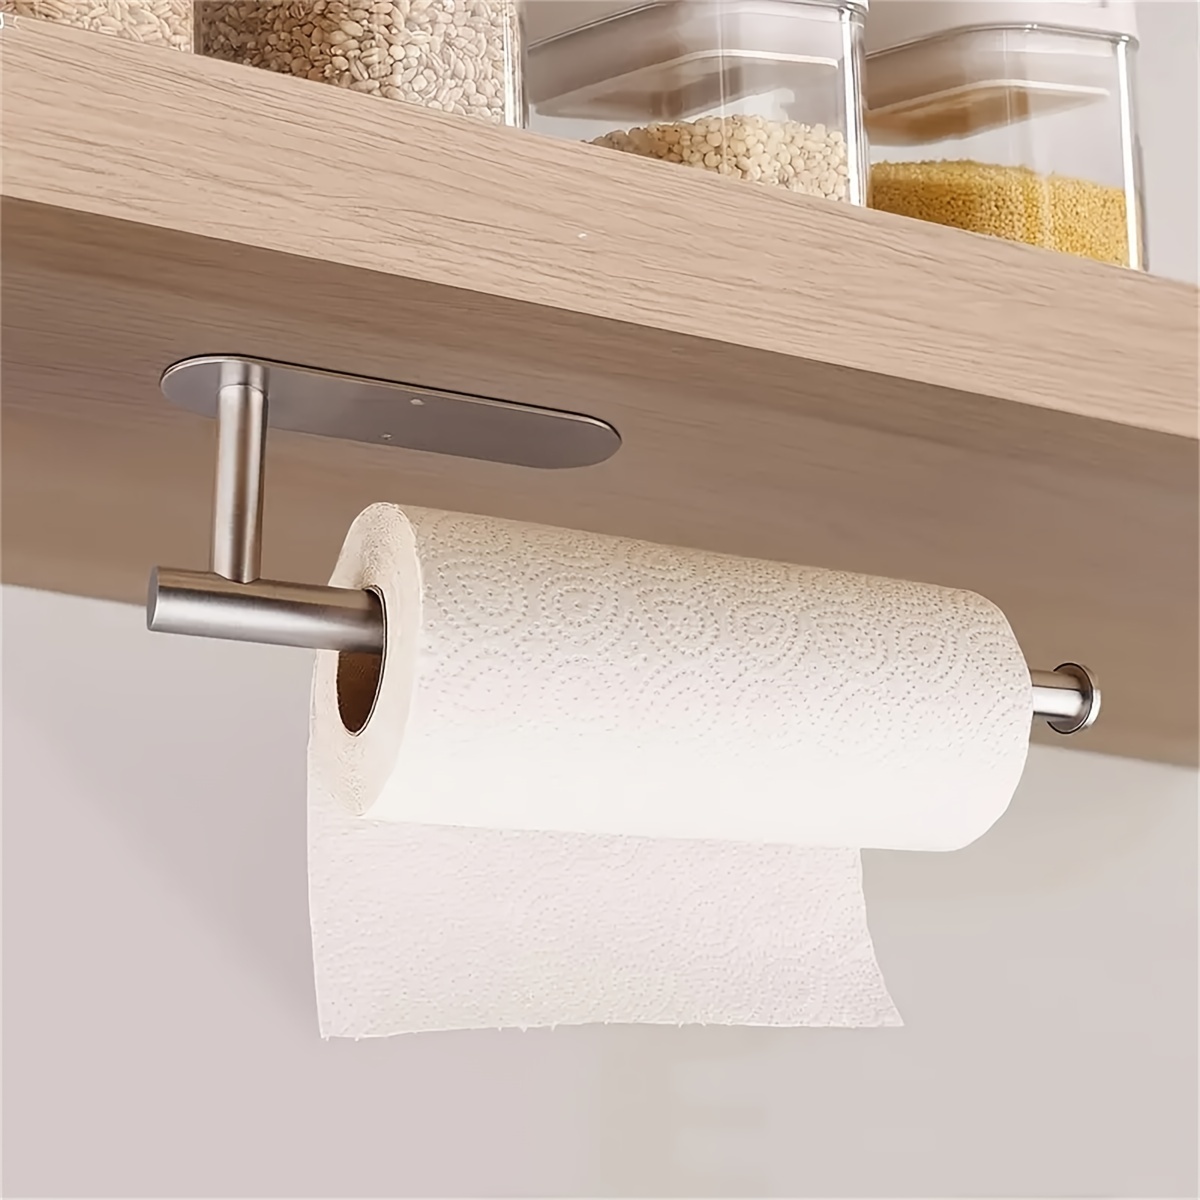 mDesign Over Cabinet Paper Towel Holder with Multi-Purpose Shelf - Chrome